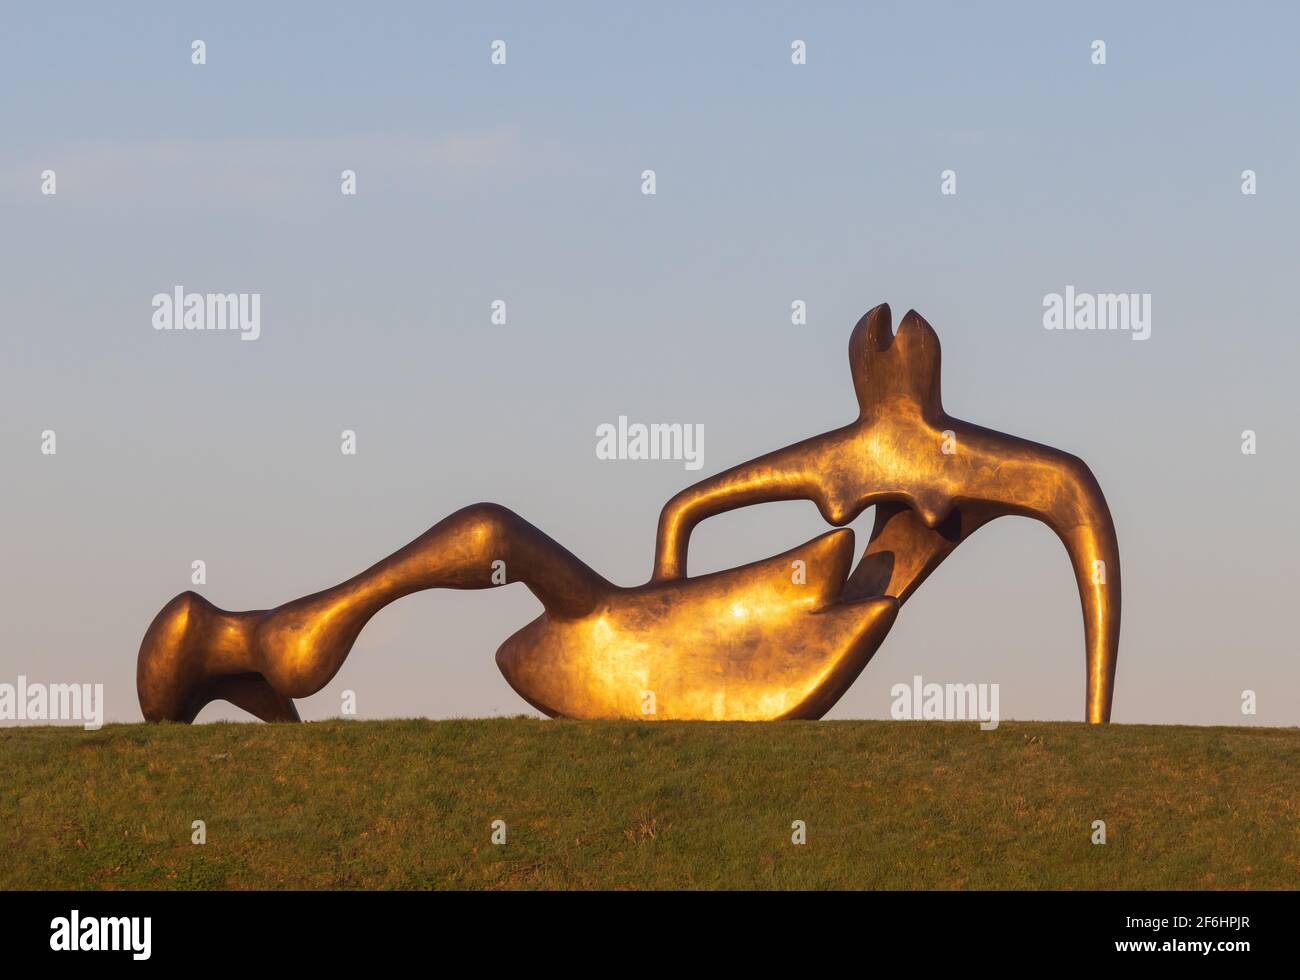 Henry Moore's Large Reclining Figure sculpture in the early morning sunlight.  Perry Green, Hertfordshire. UK. March 2021 Stock Photo